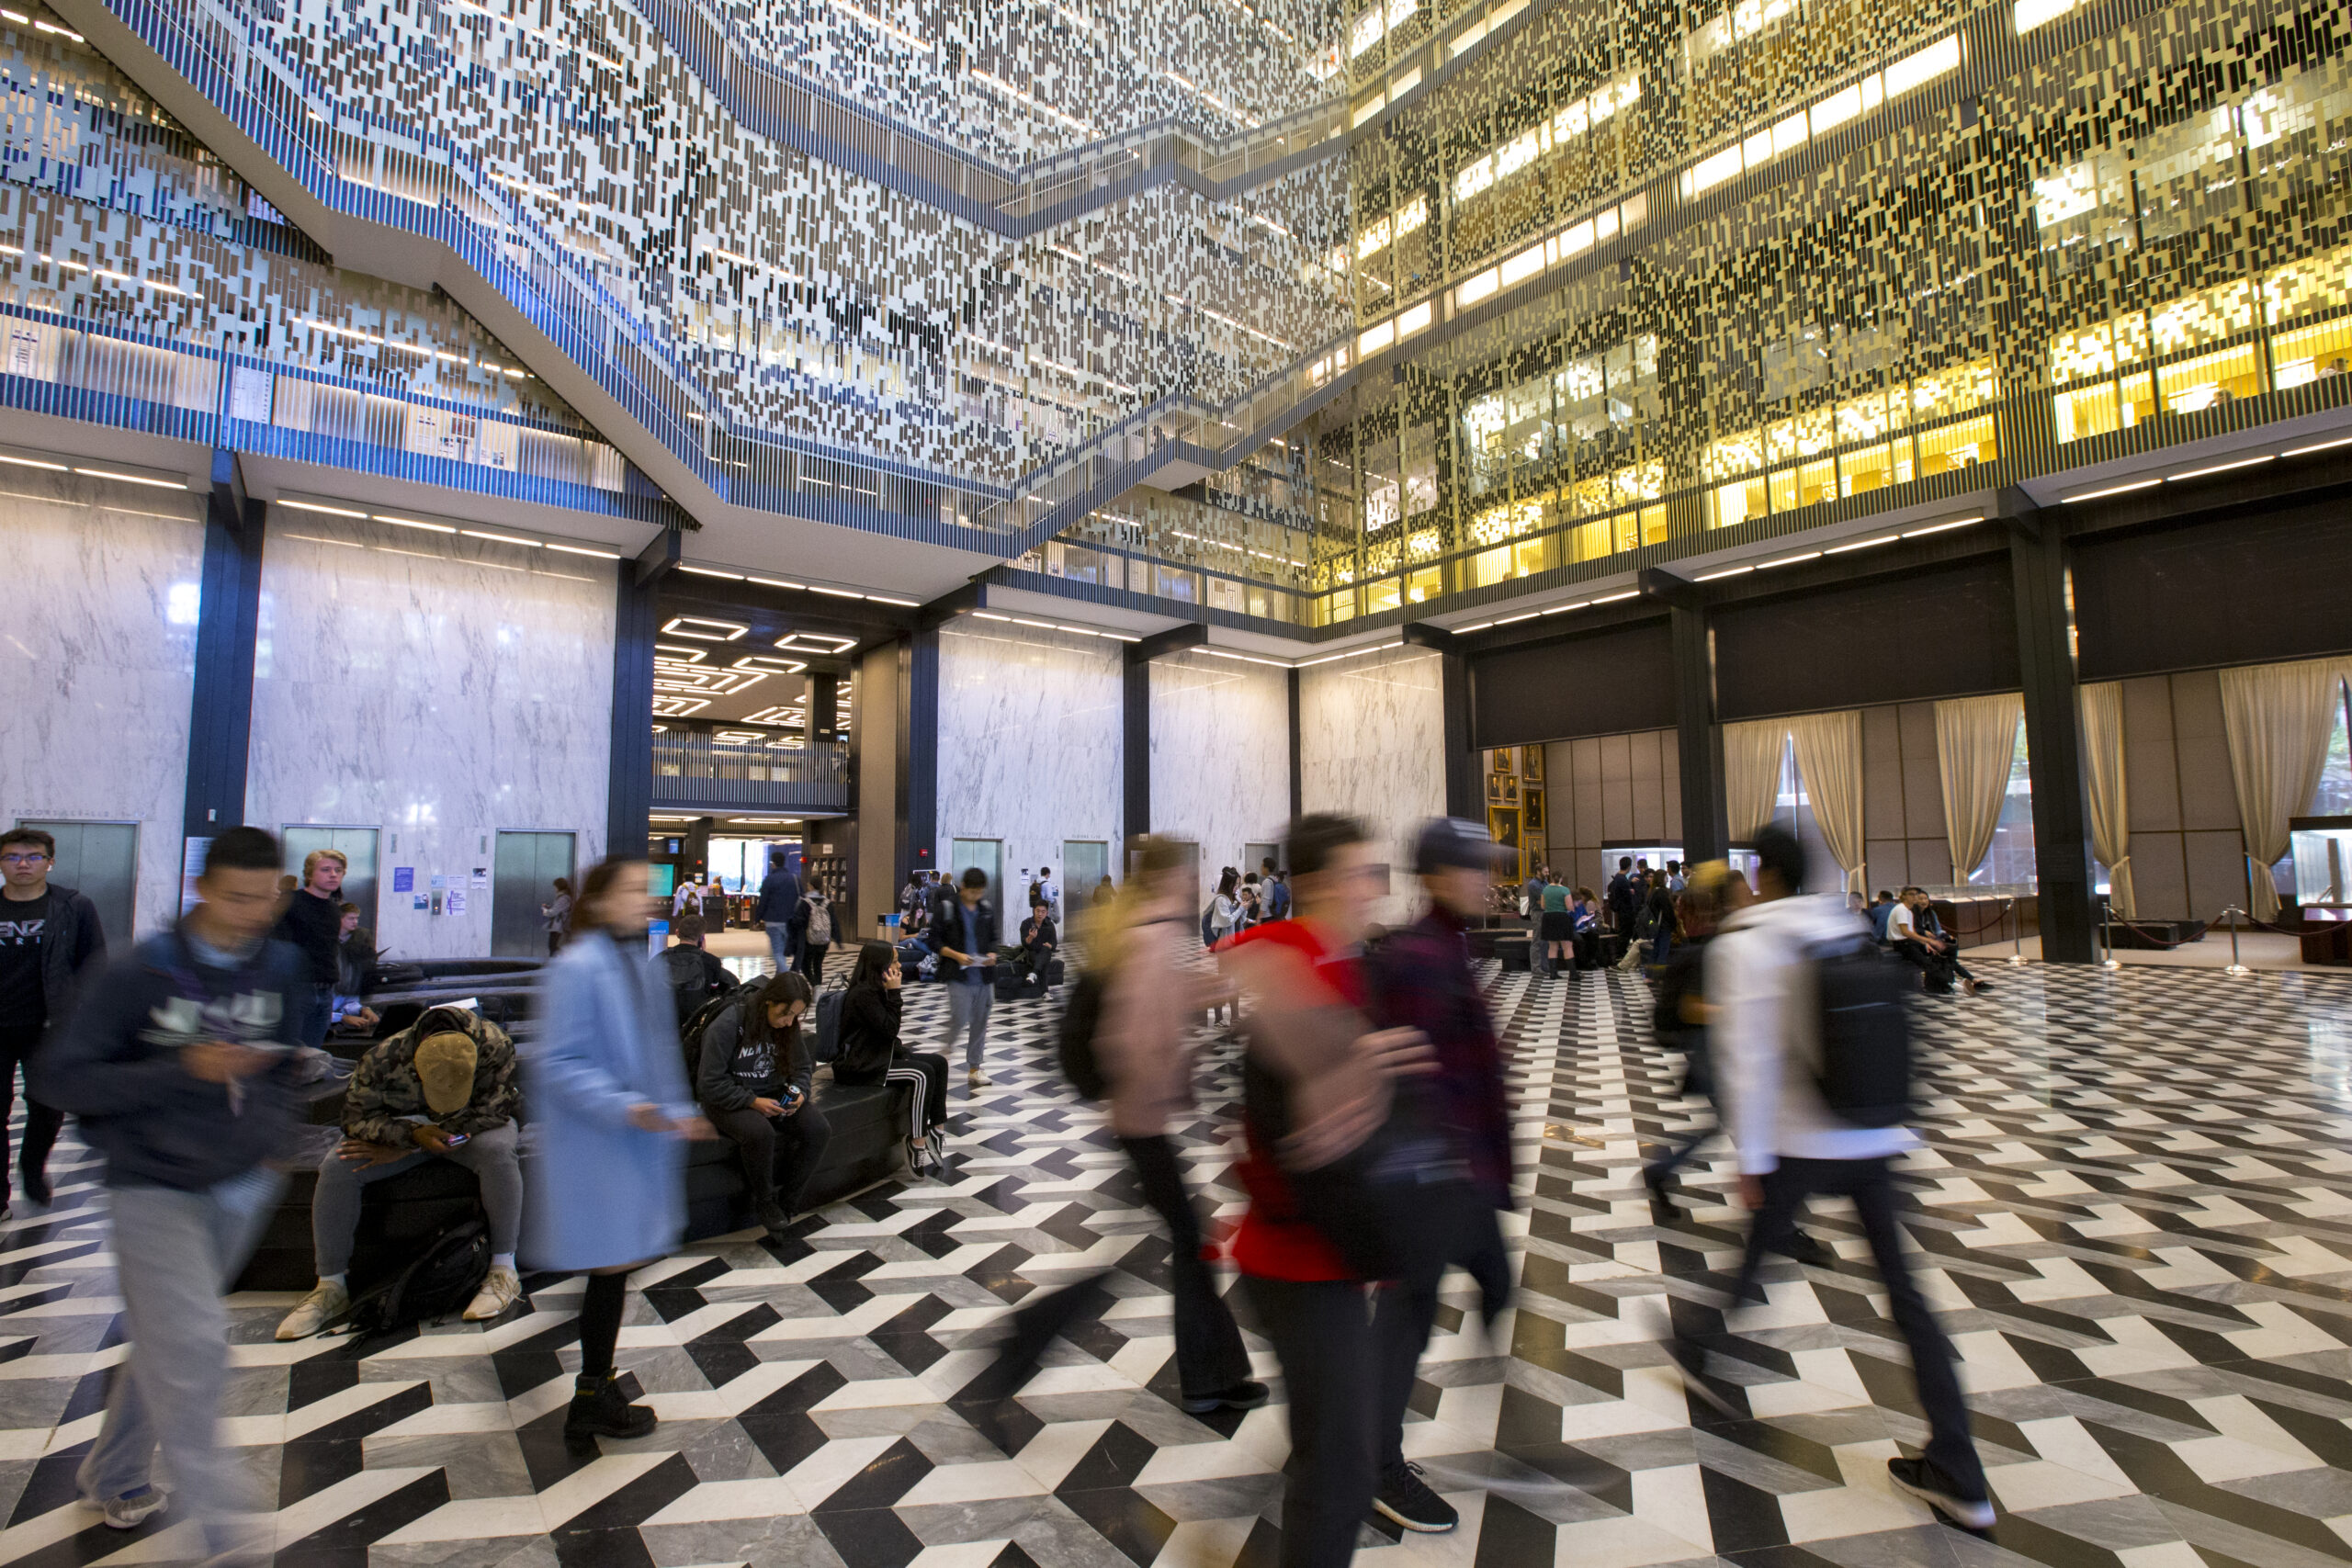 Students passing through the lobby of Bobst Library.